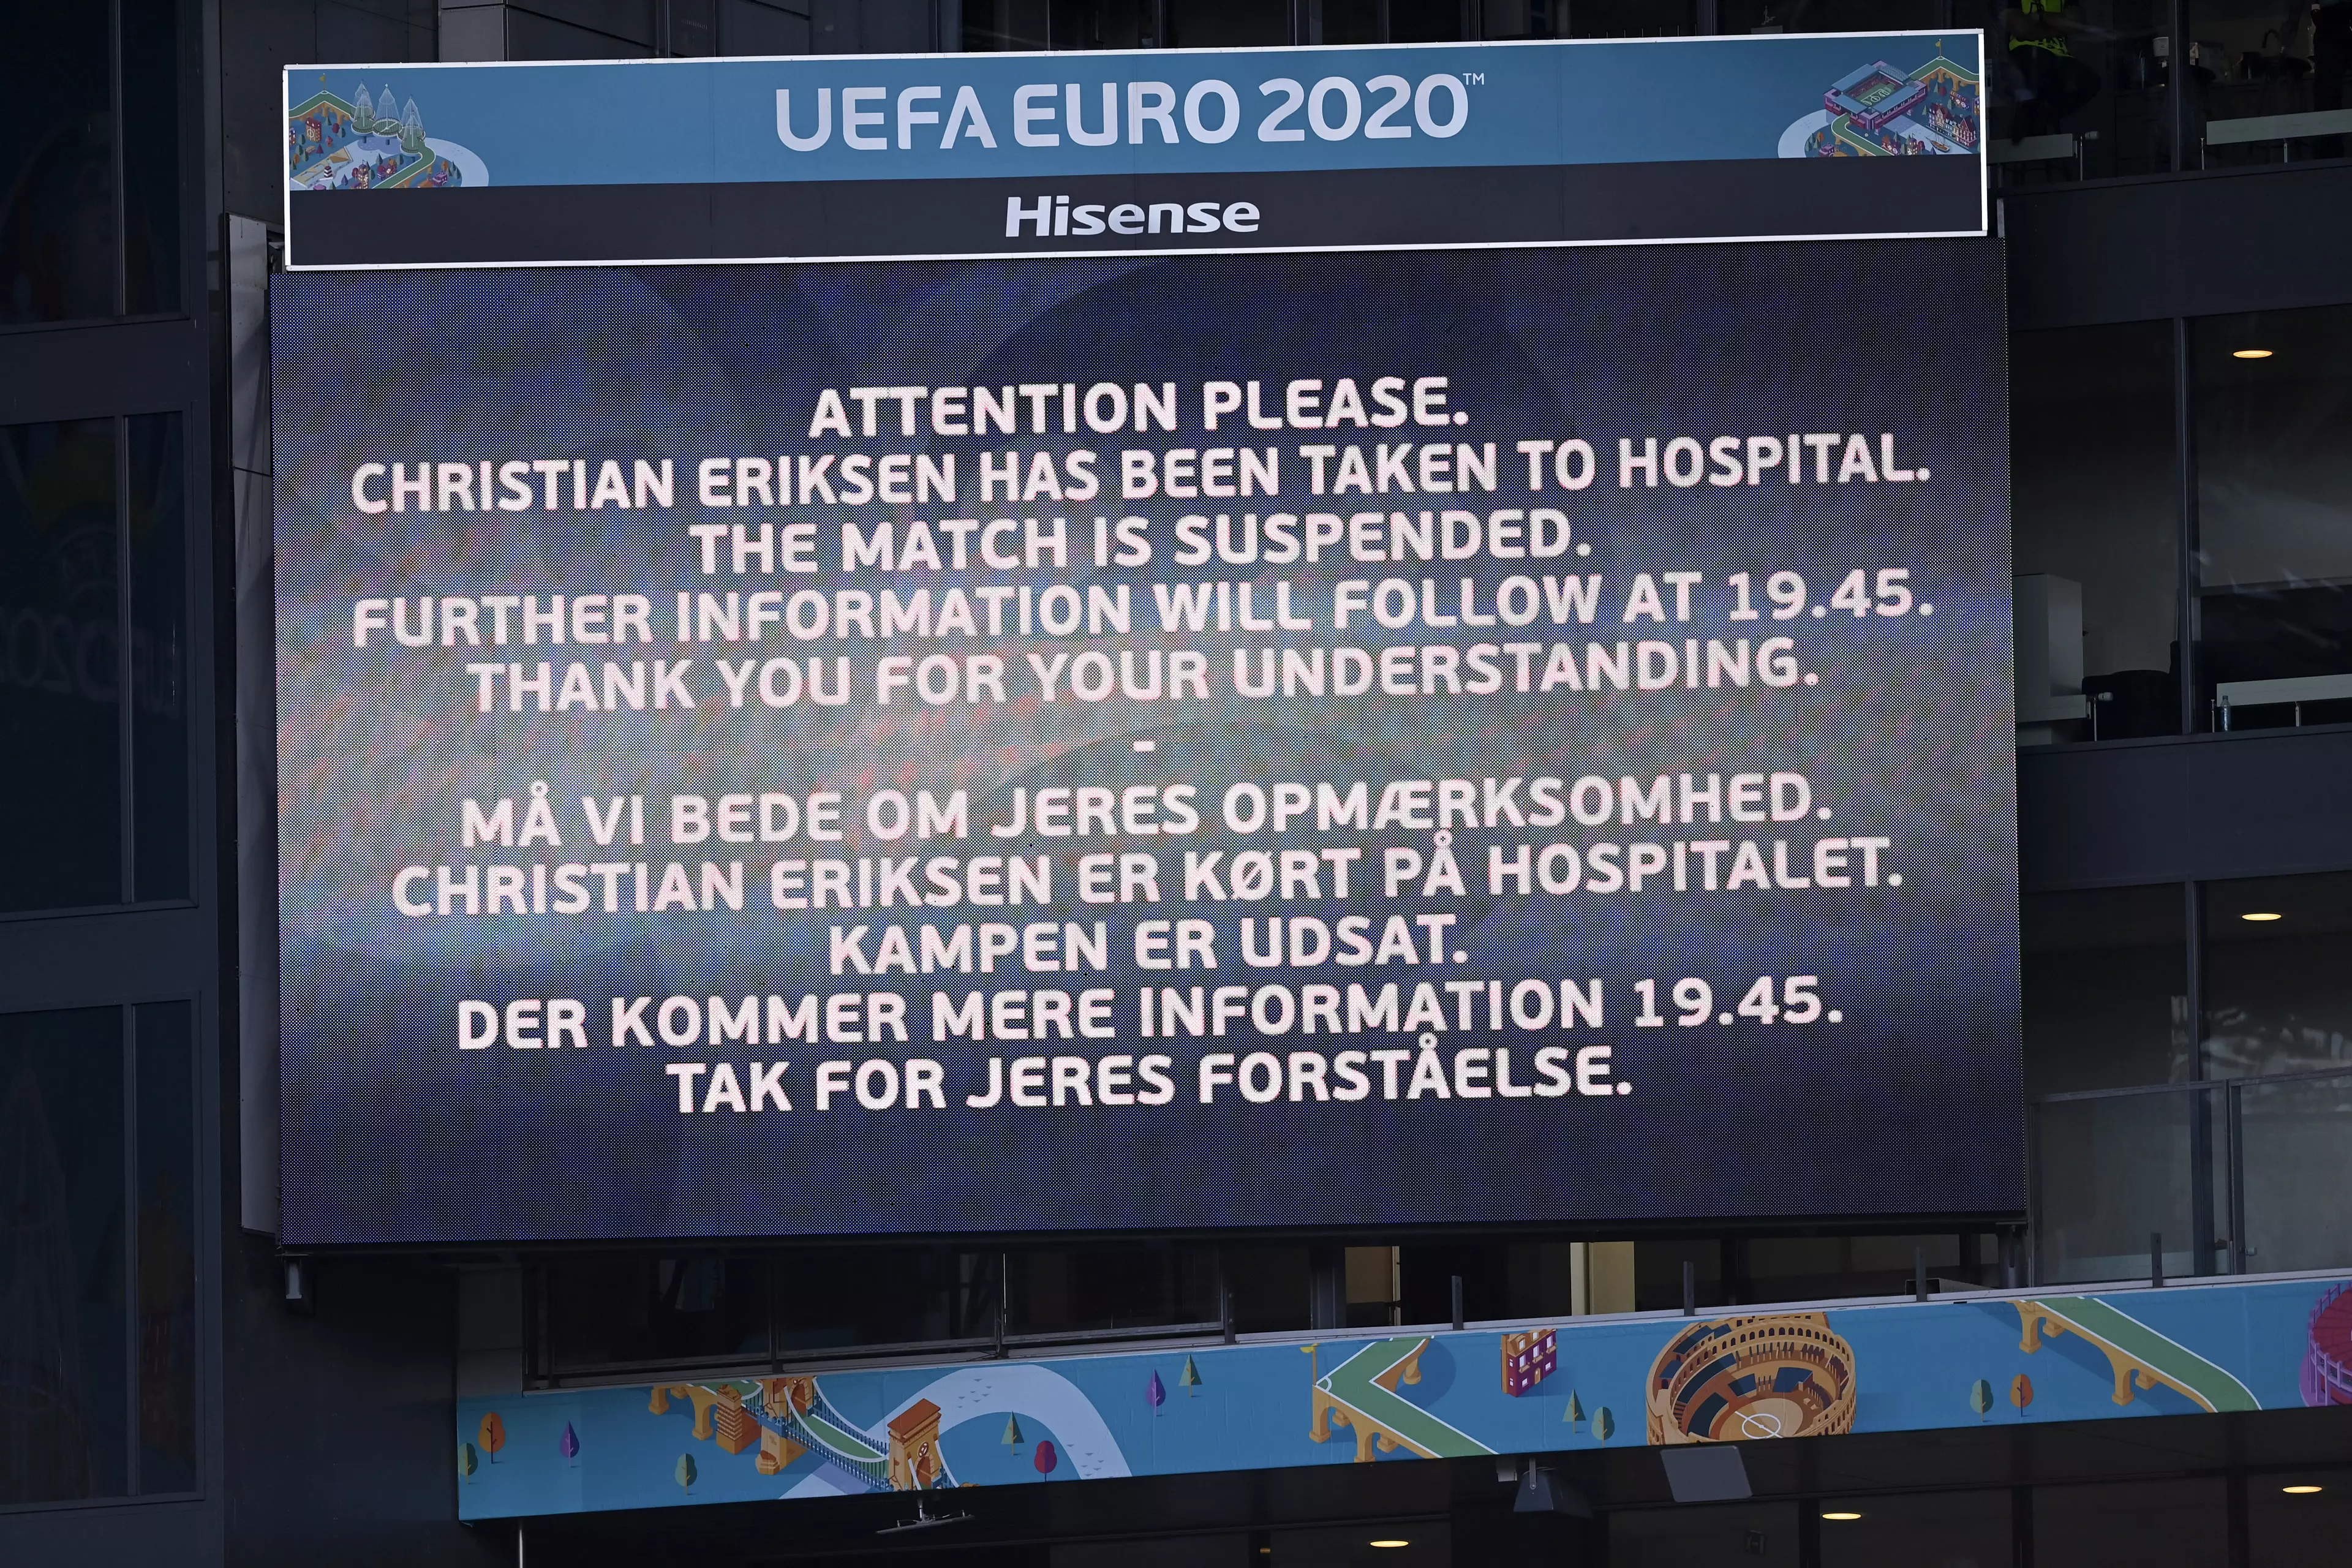 A video screen announces that Denmark's Christian Eriksen has been taken to hospital and the game is suspended.